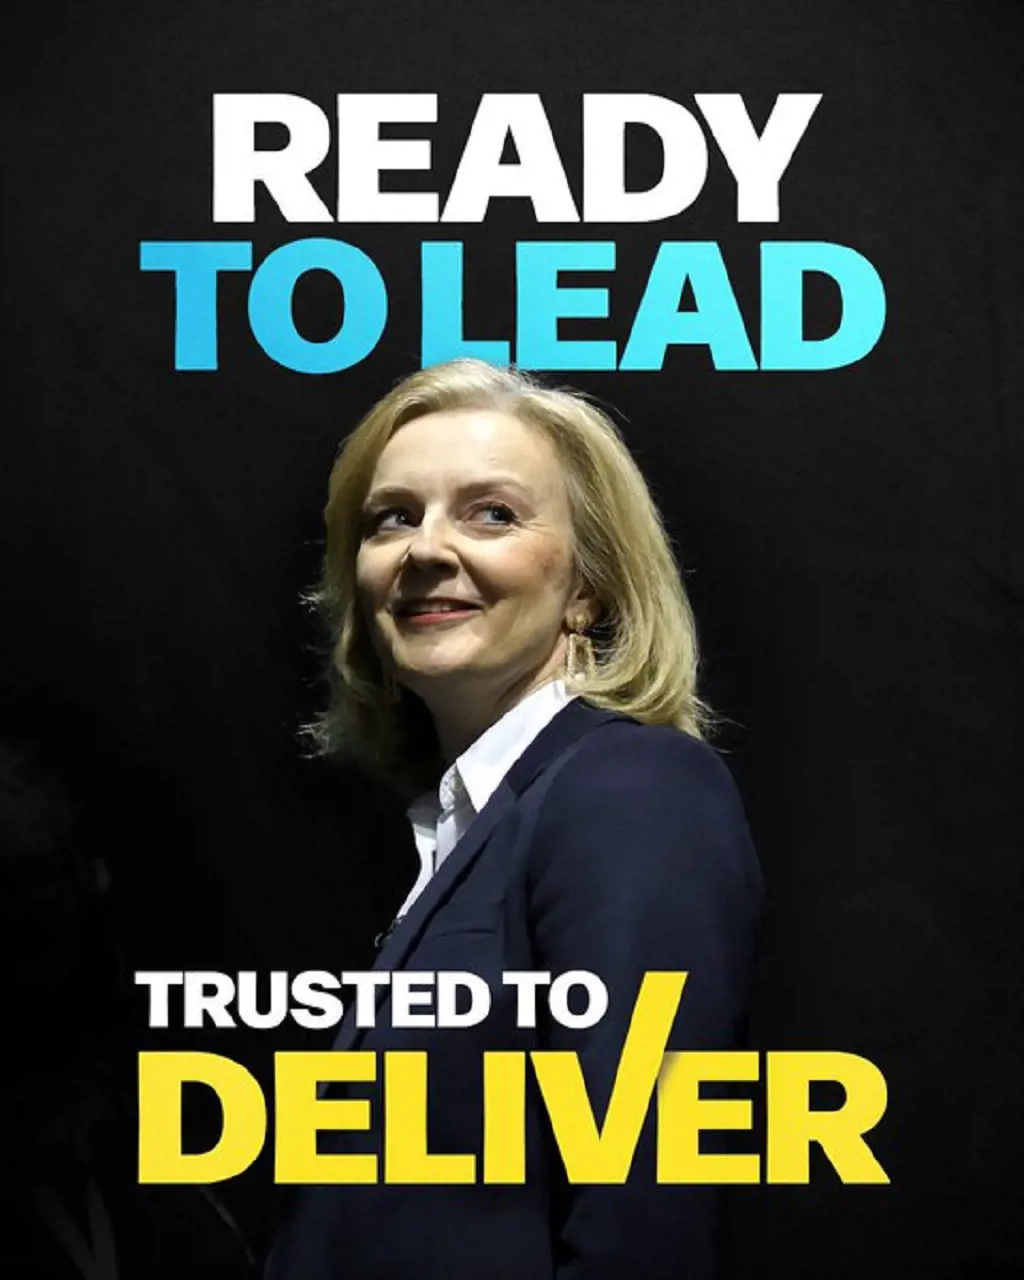 Liz Truss's campaign for UK PM candidacy